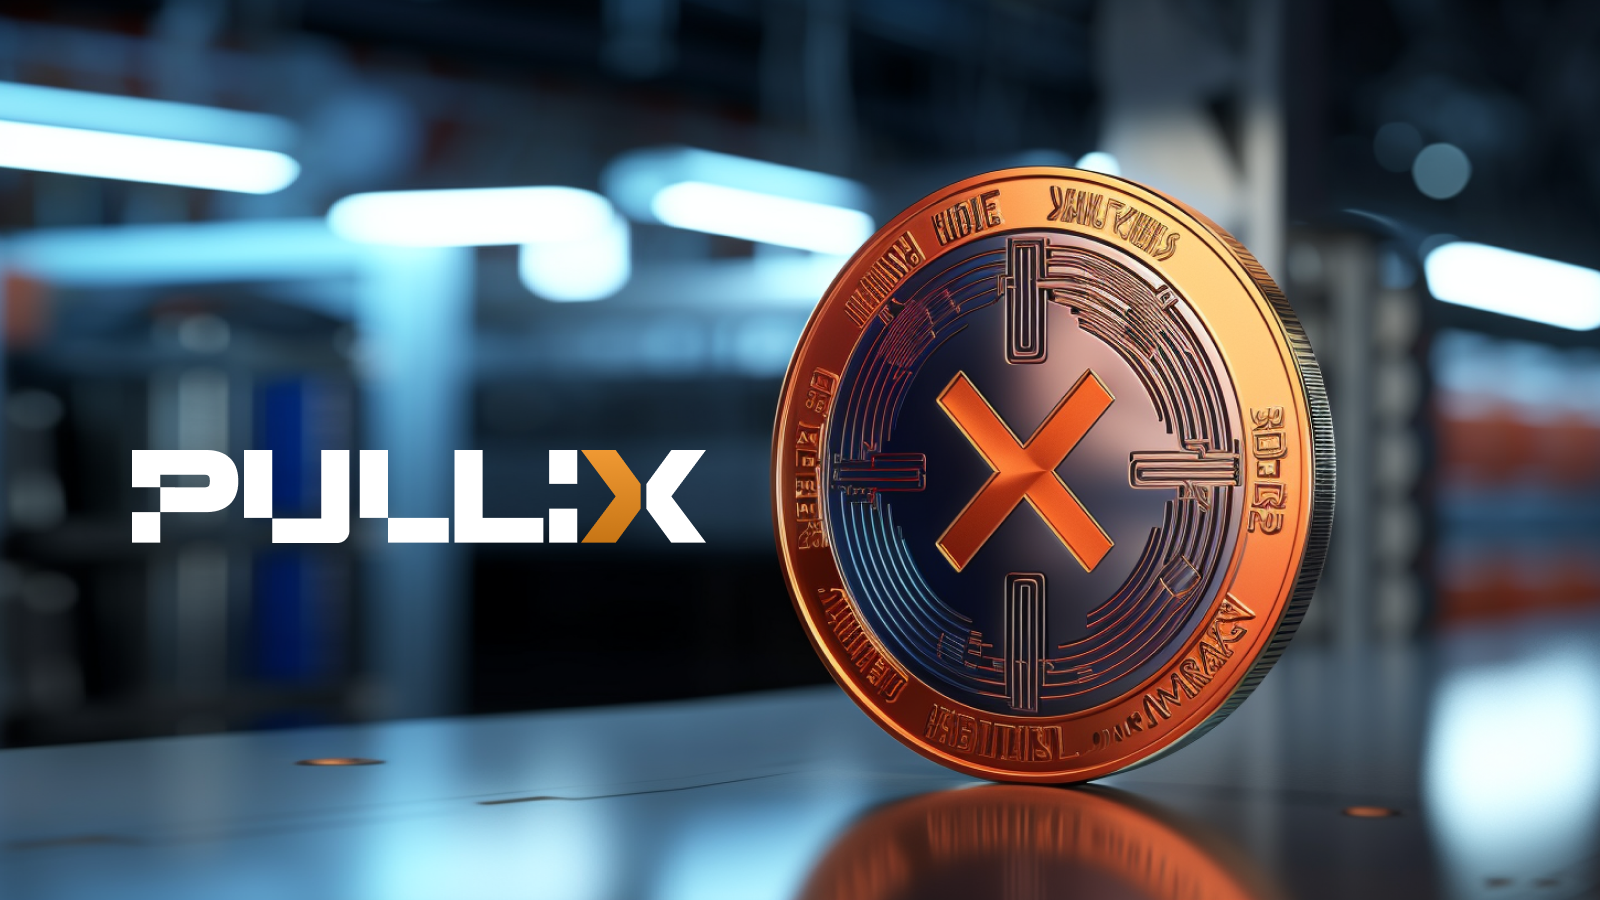 Altcoins On The Verge Of Breaking Into The Top 20 Tokens - Pullix (PLX), Injective (INJ), Tezos (XTZ)